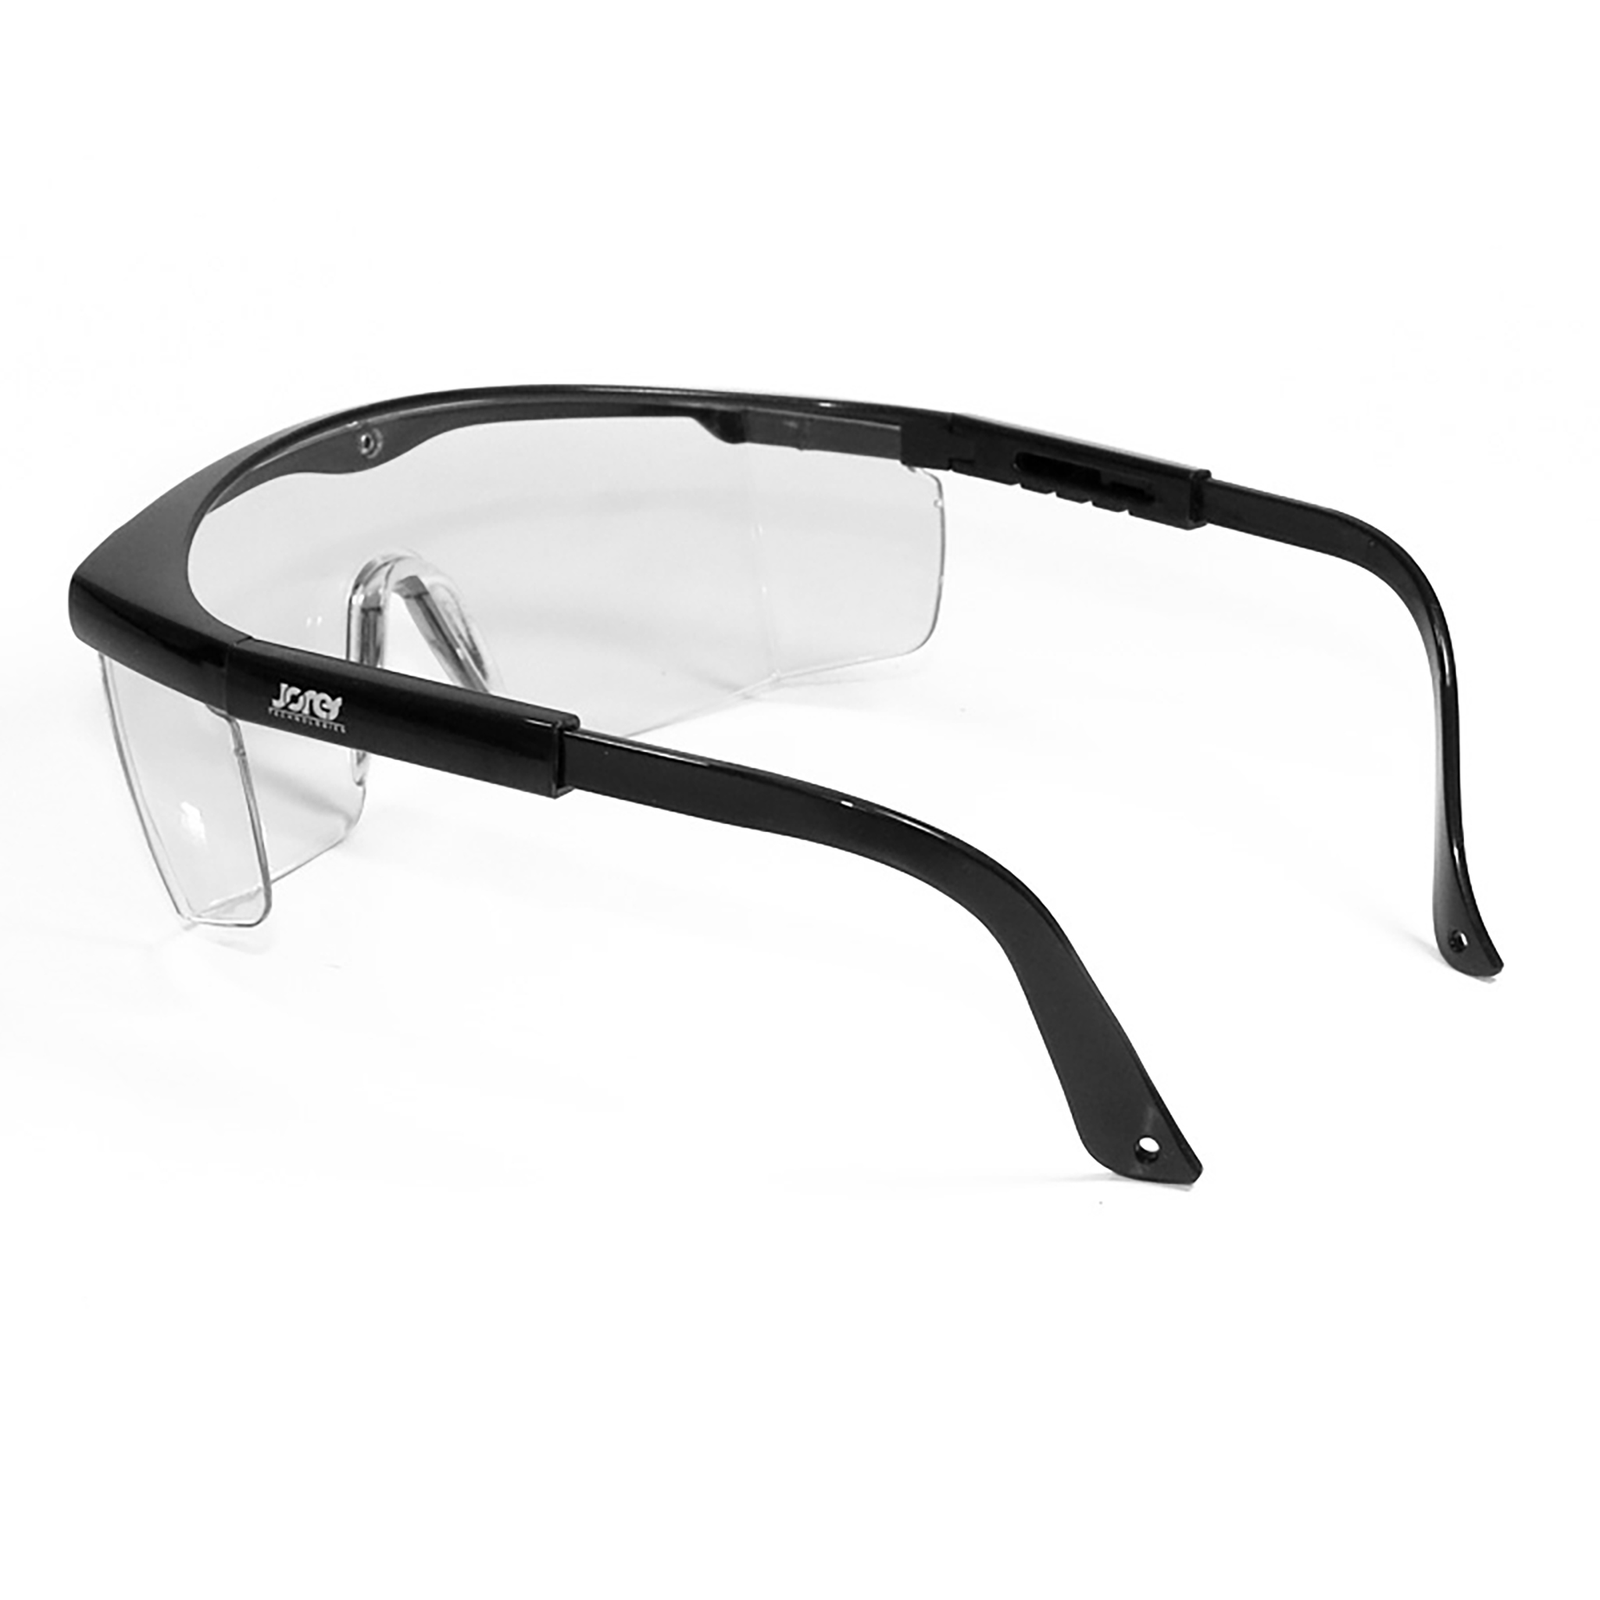 back folded view of the black framed rectangular safety clear glasses with side shields for high impact protection